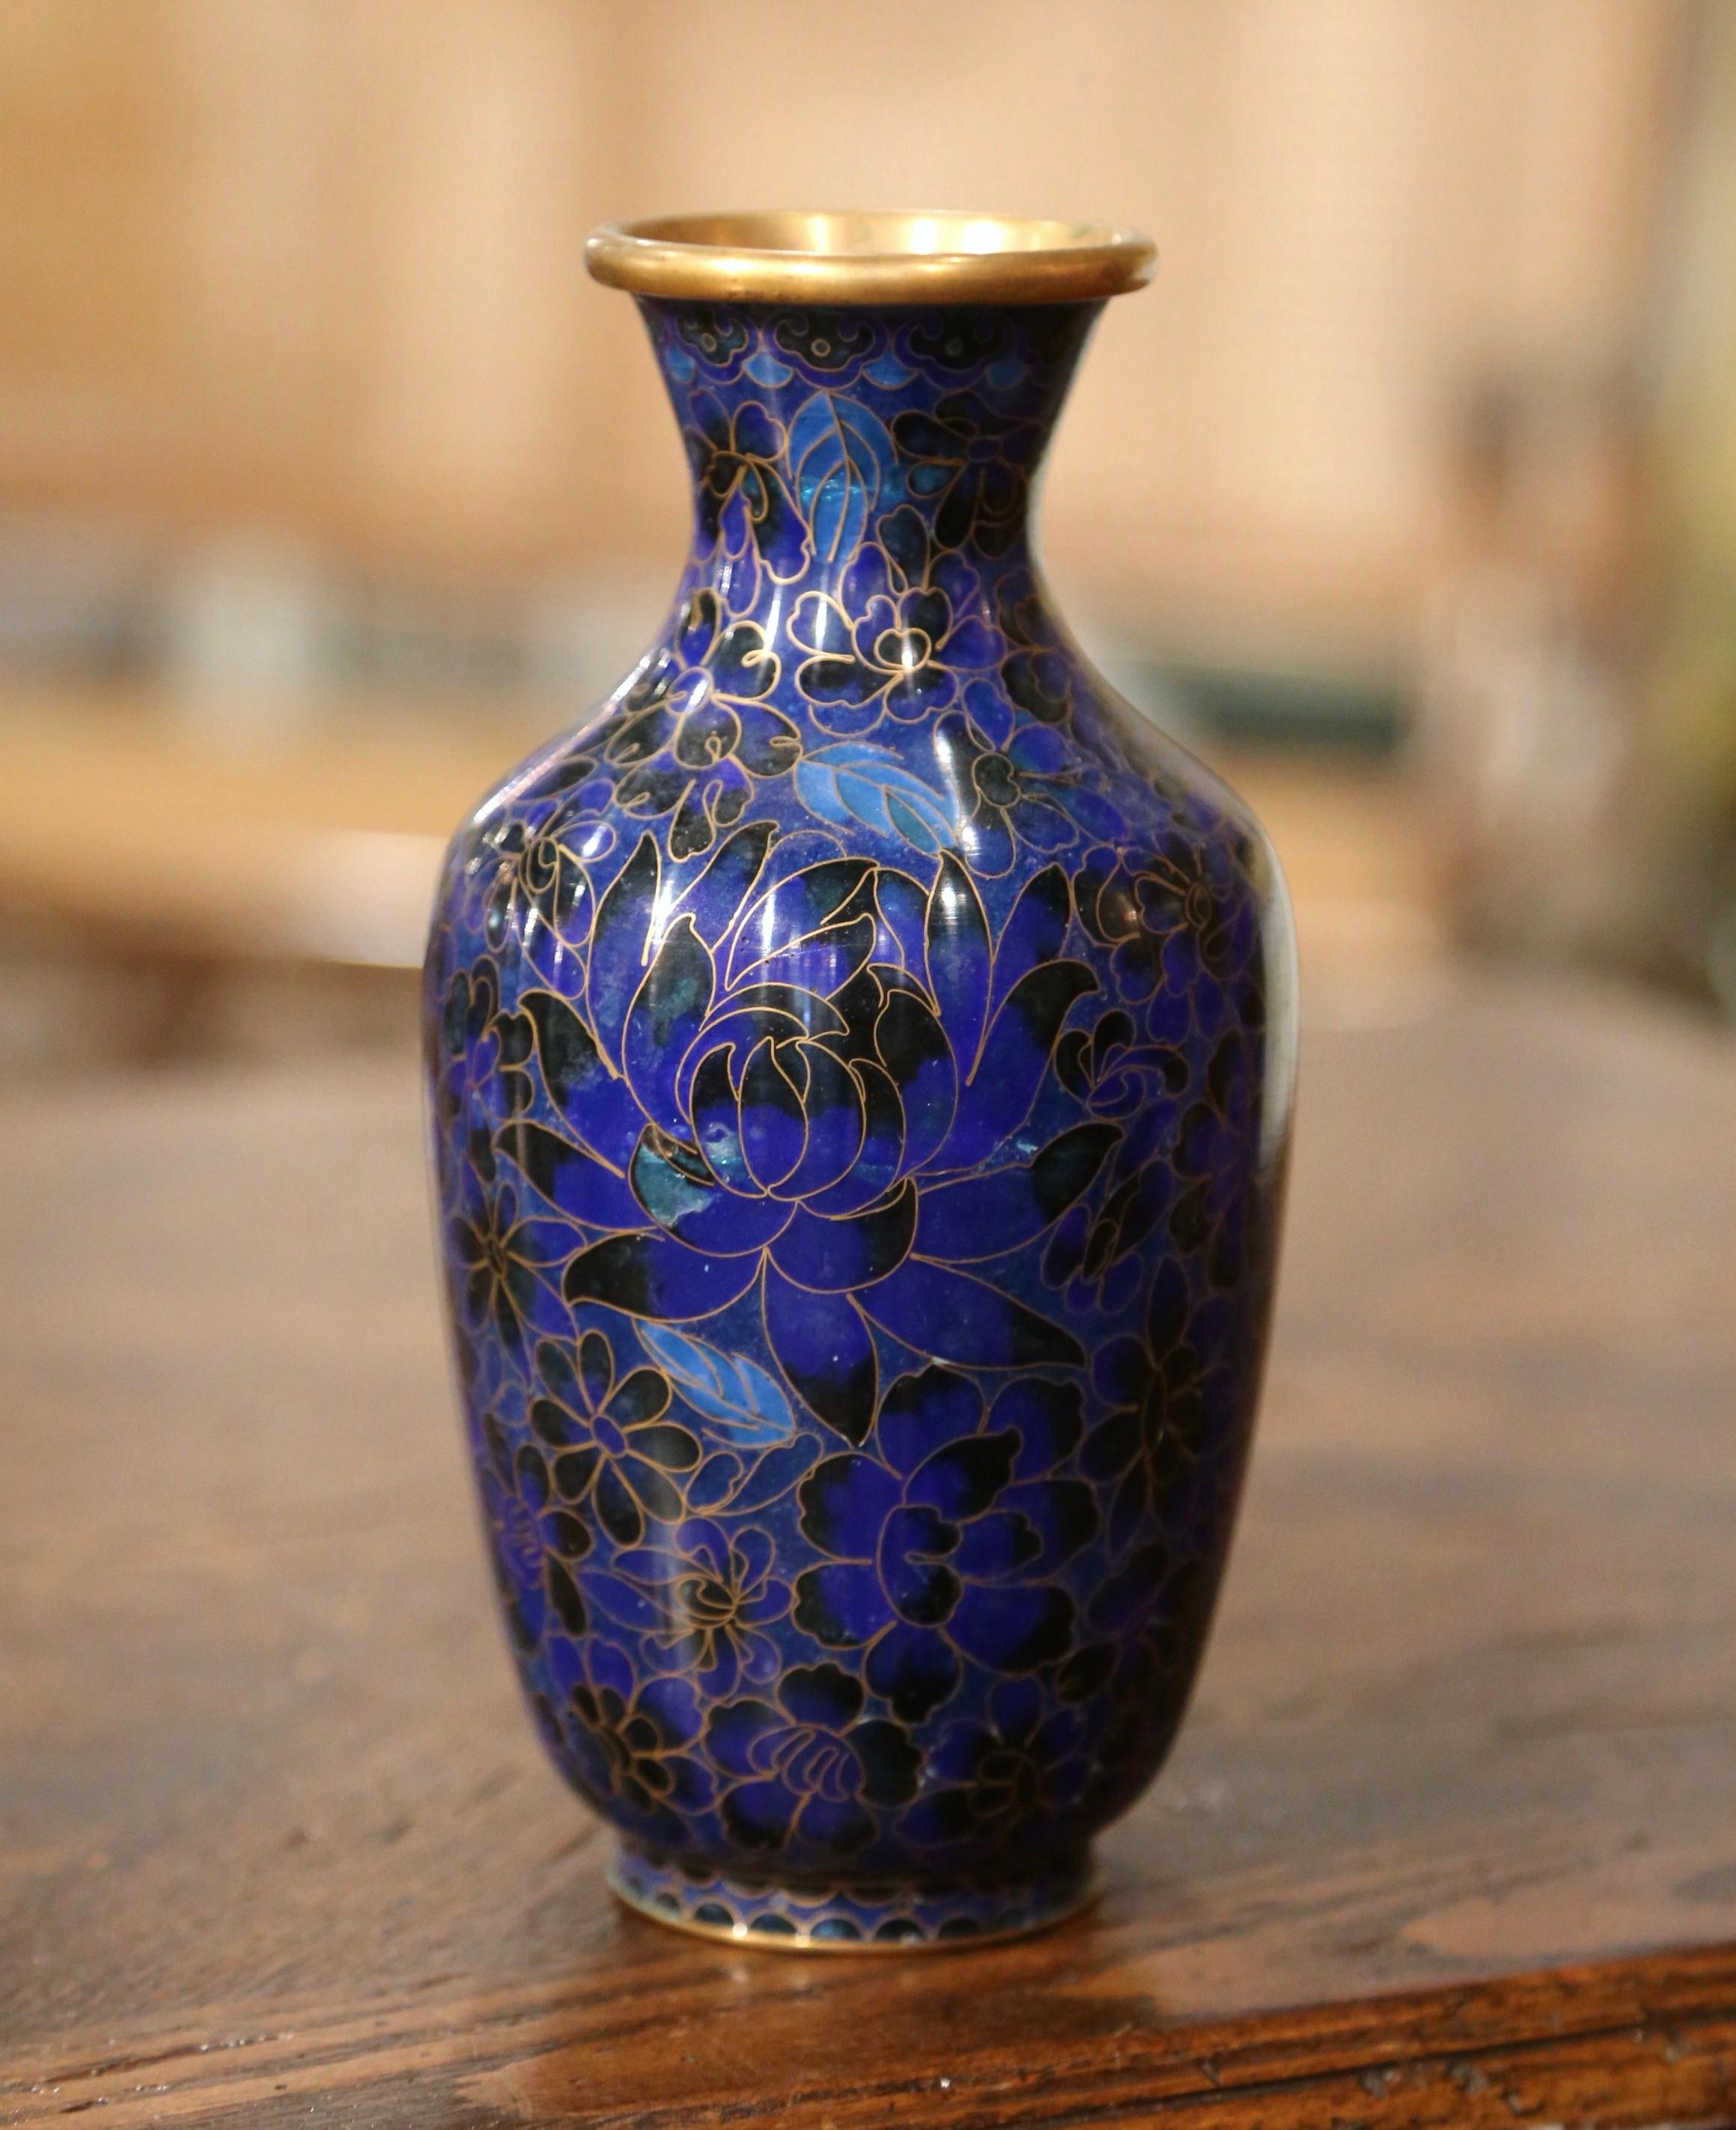  Vintage Chinese Cloisonne Champleve Enamel Vase with Floral Motifs  In Excellent Condition For Sale In Dallas, TX